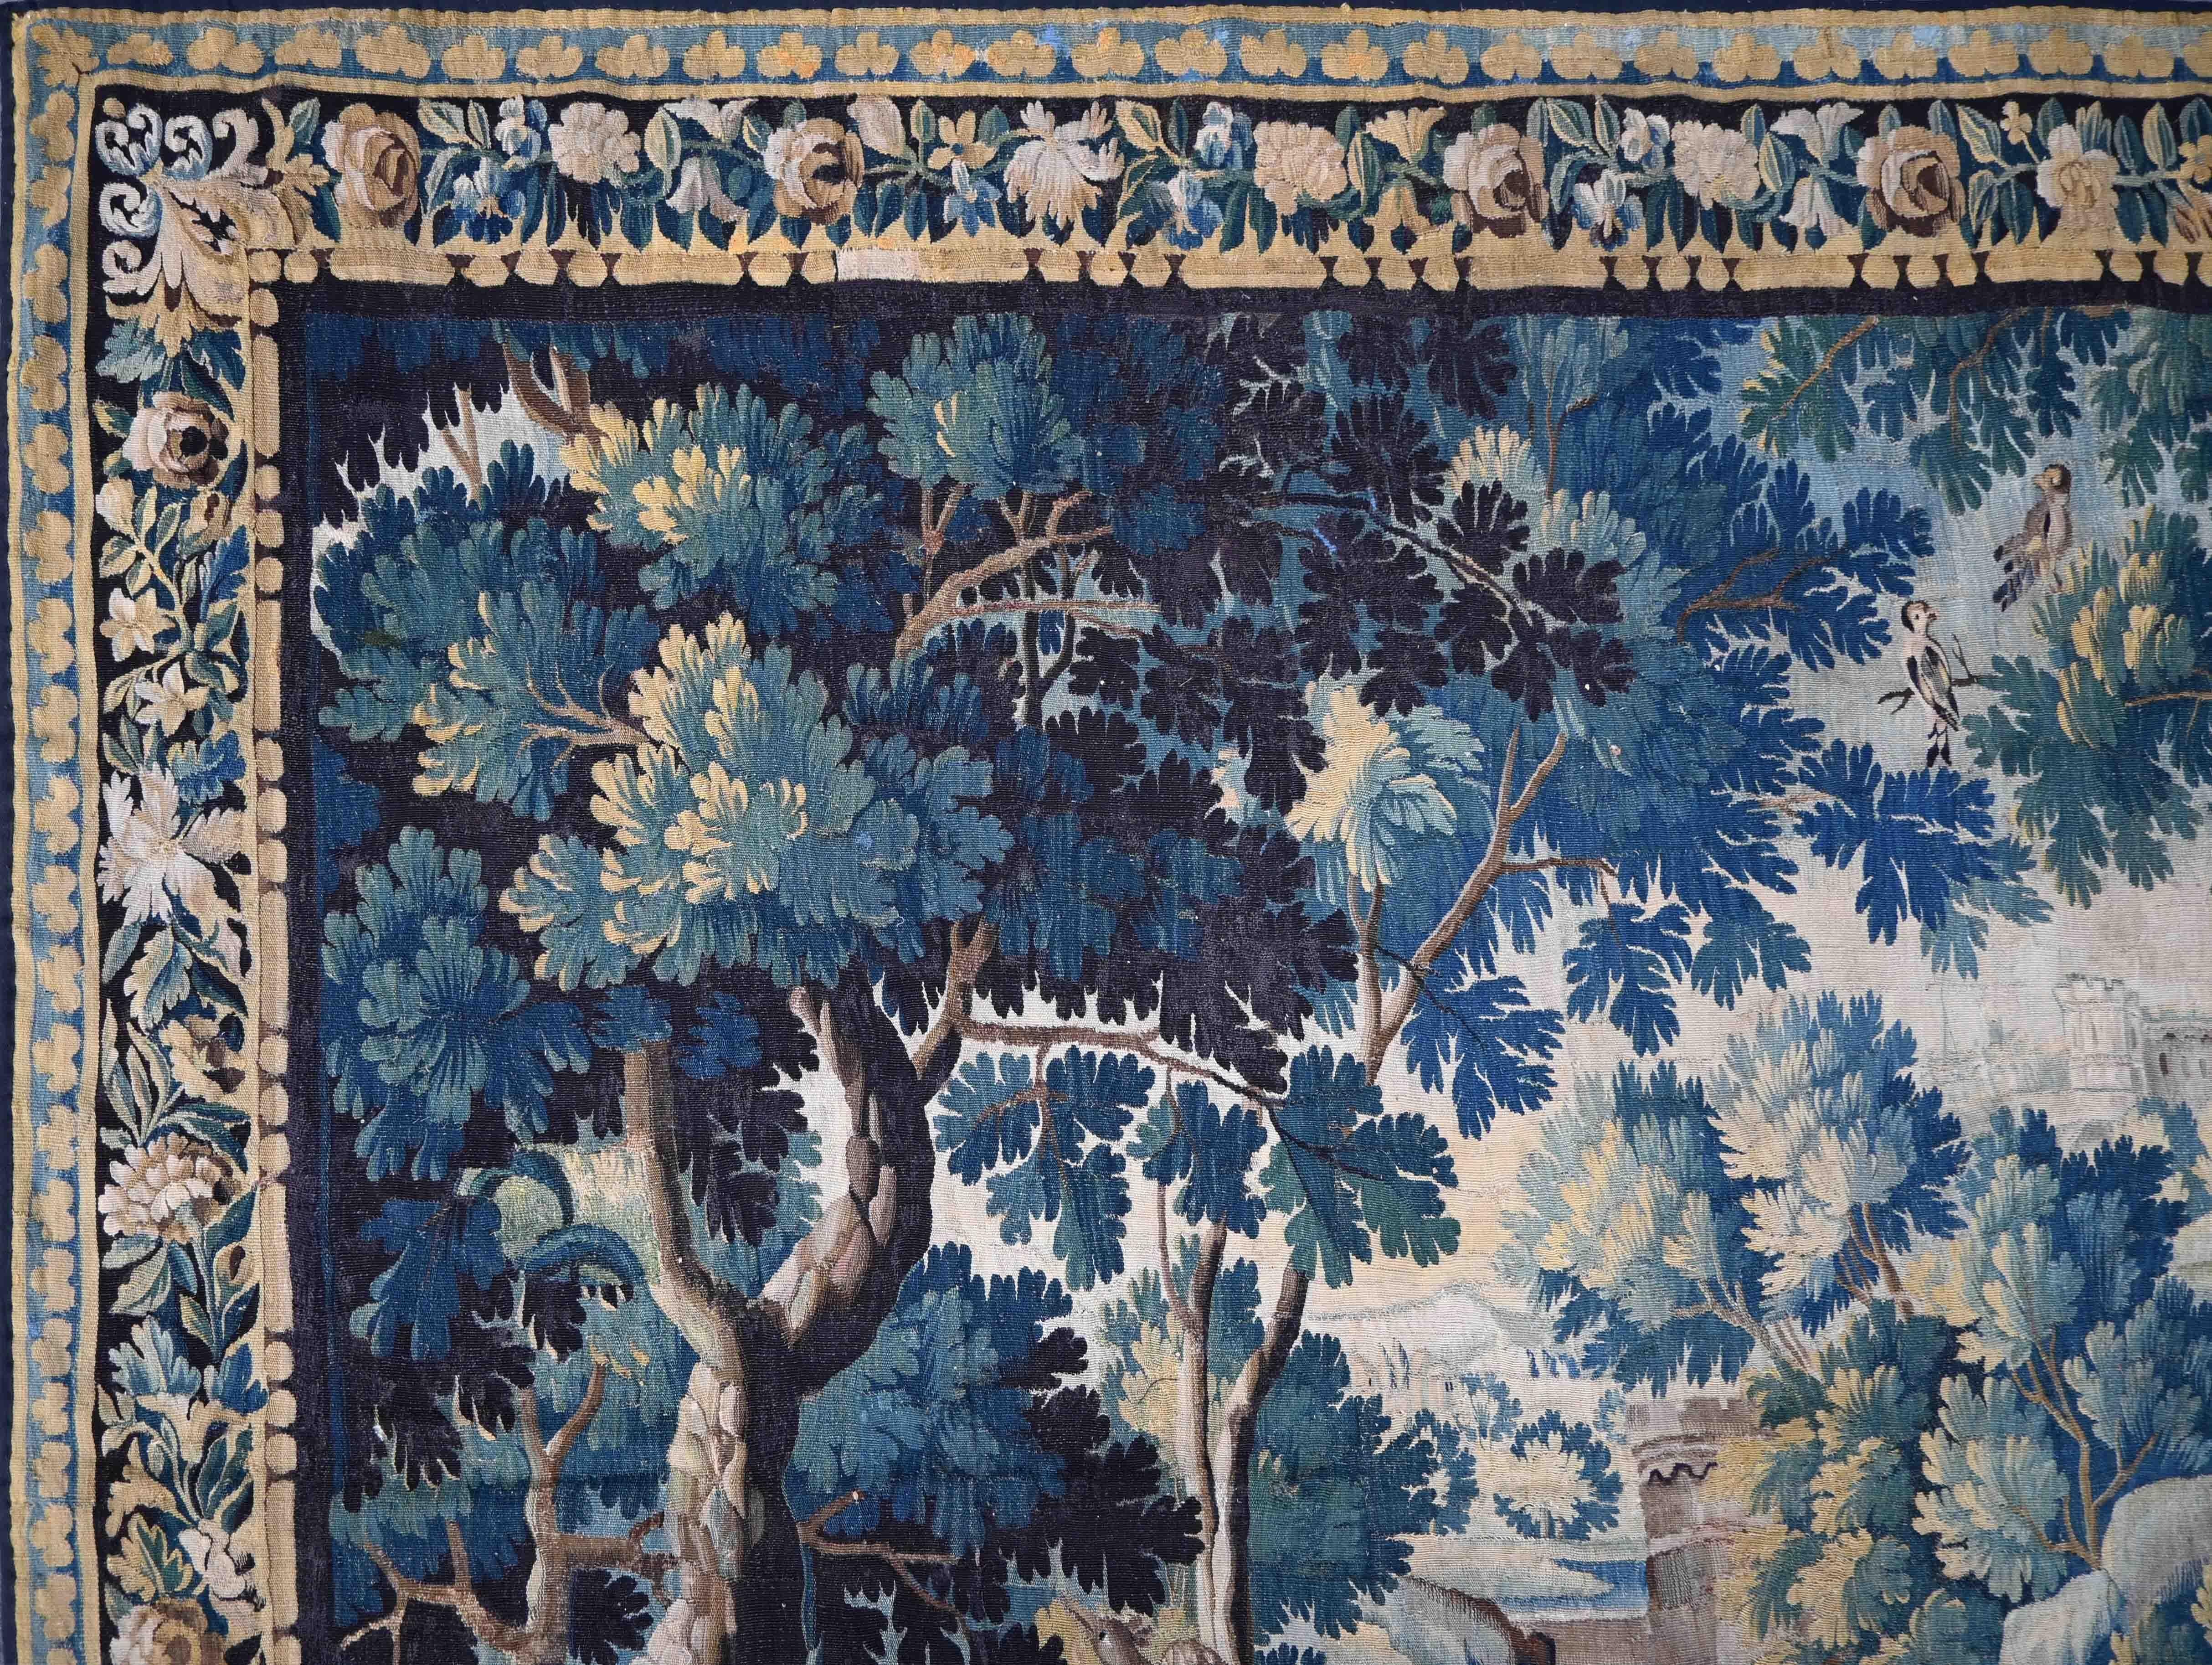 18th century Aubusson tapestry (greenery) - N°-1345

Close to the Eiffel Tower, We are a family business specialized in the purchase, sale and expertise of
tapestries, carpets, kilims and textiles old, modern and contemporary.
We work for private